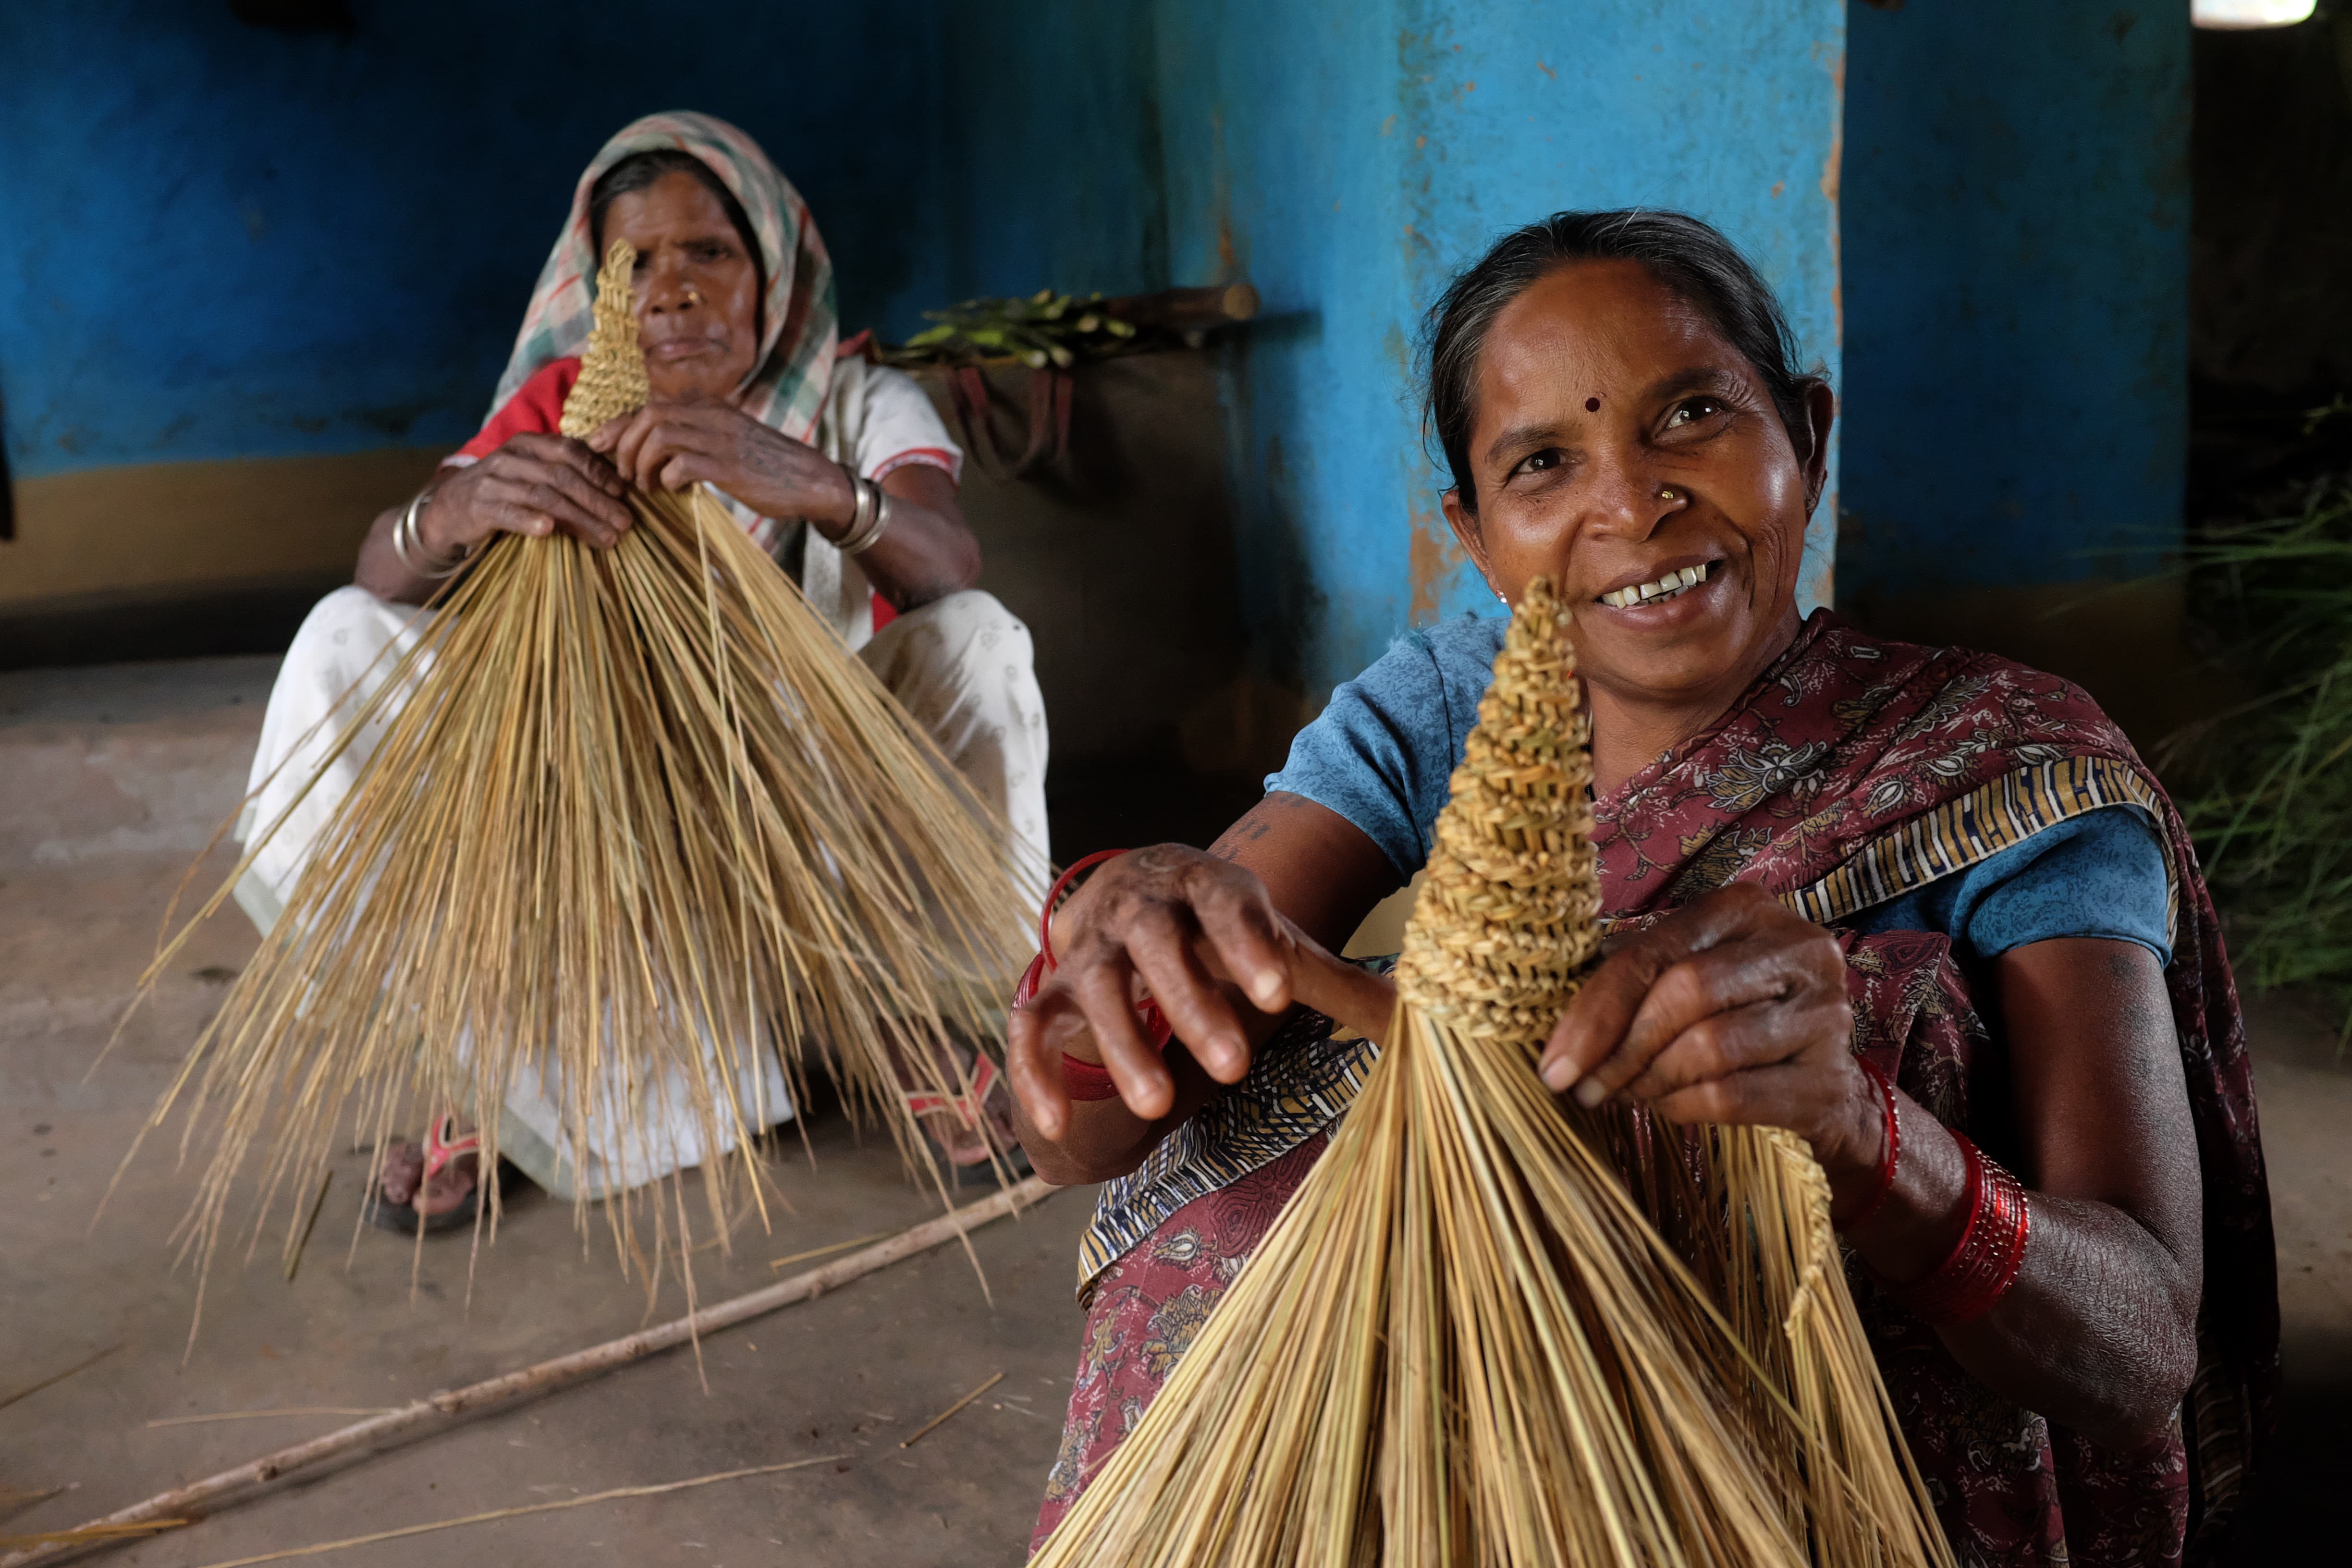 Forest dwelling communities often use forest resources for their daily needs. Here, Budhia Bai Nuresia (left) and Talap Bai Hupendi (right) are making brooms out of the leaves and grass from their forest. (Photo: Rohan Mukherji)